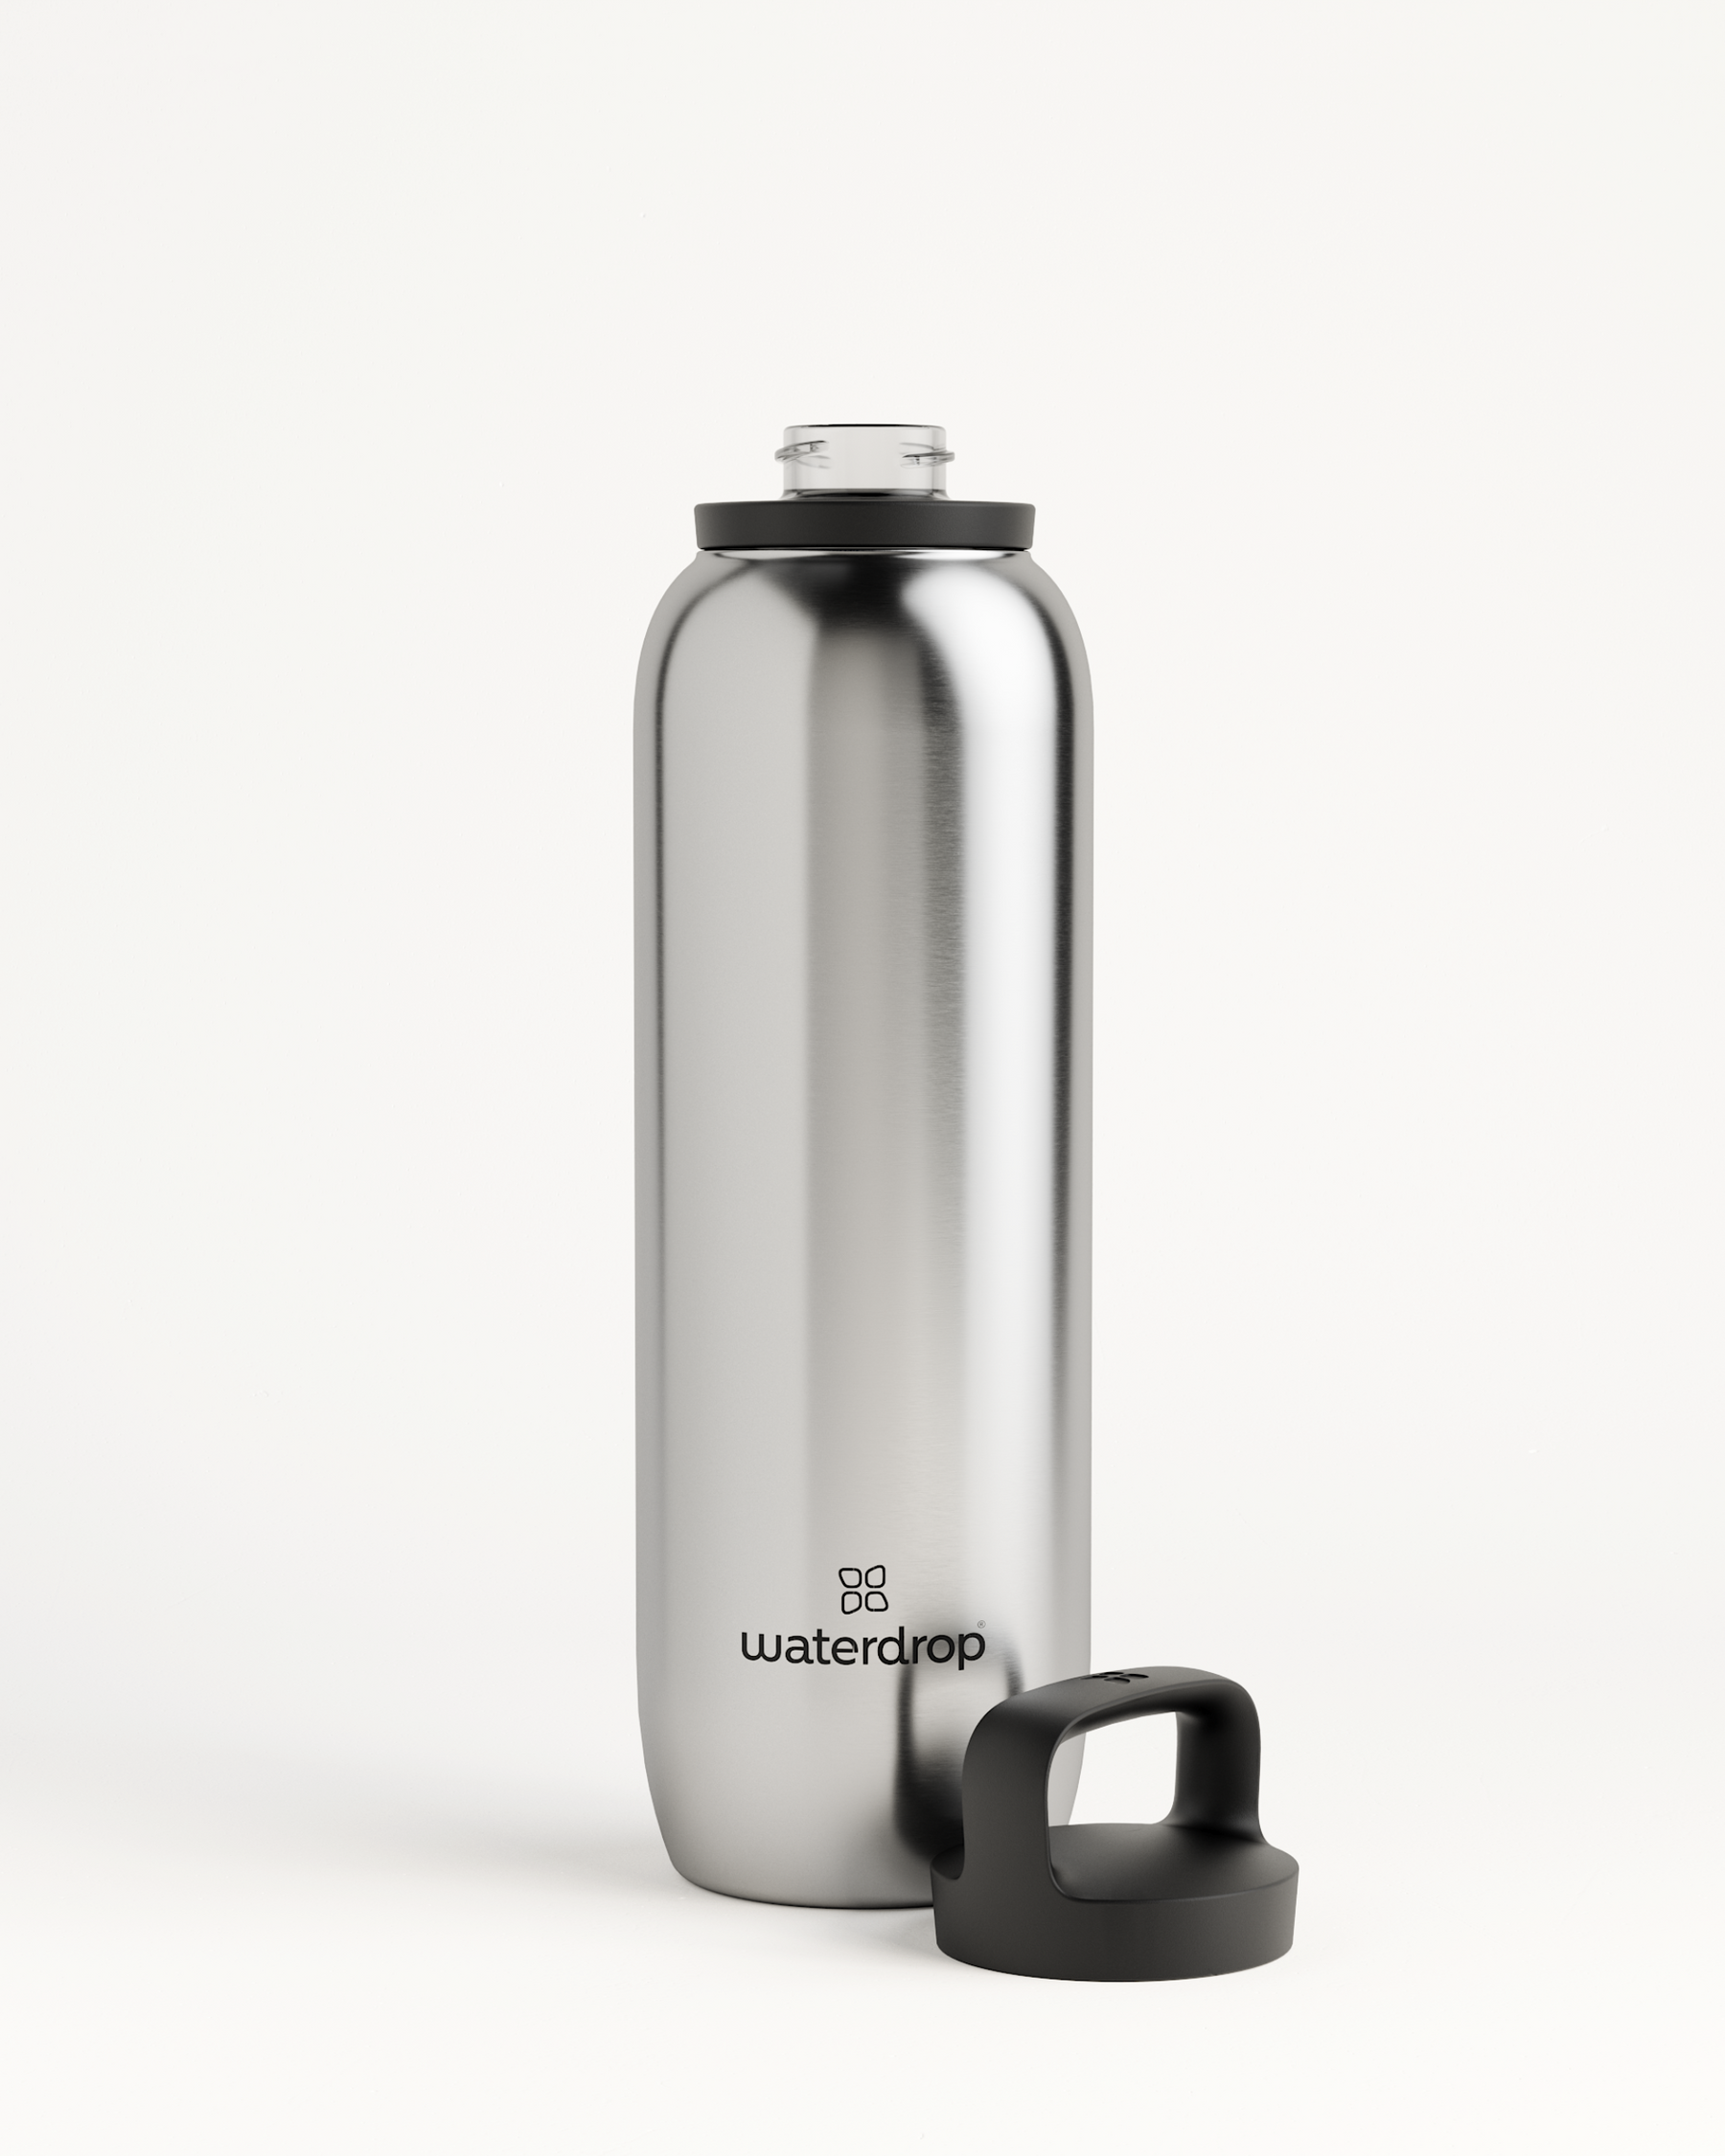 Waterdrop All-Purpose Thermo Bottle · Spout Lid - Black Matt - 64 oz - Stainless Steel Water Bottle - Insulated Water Bottle - Sustainable